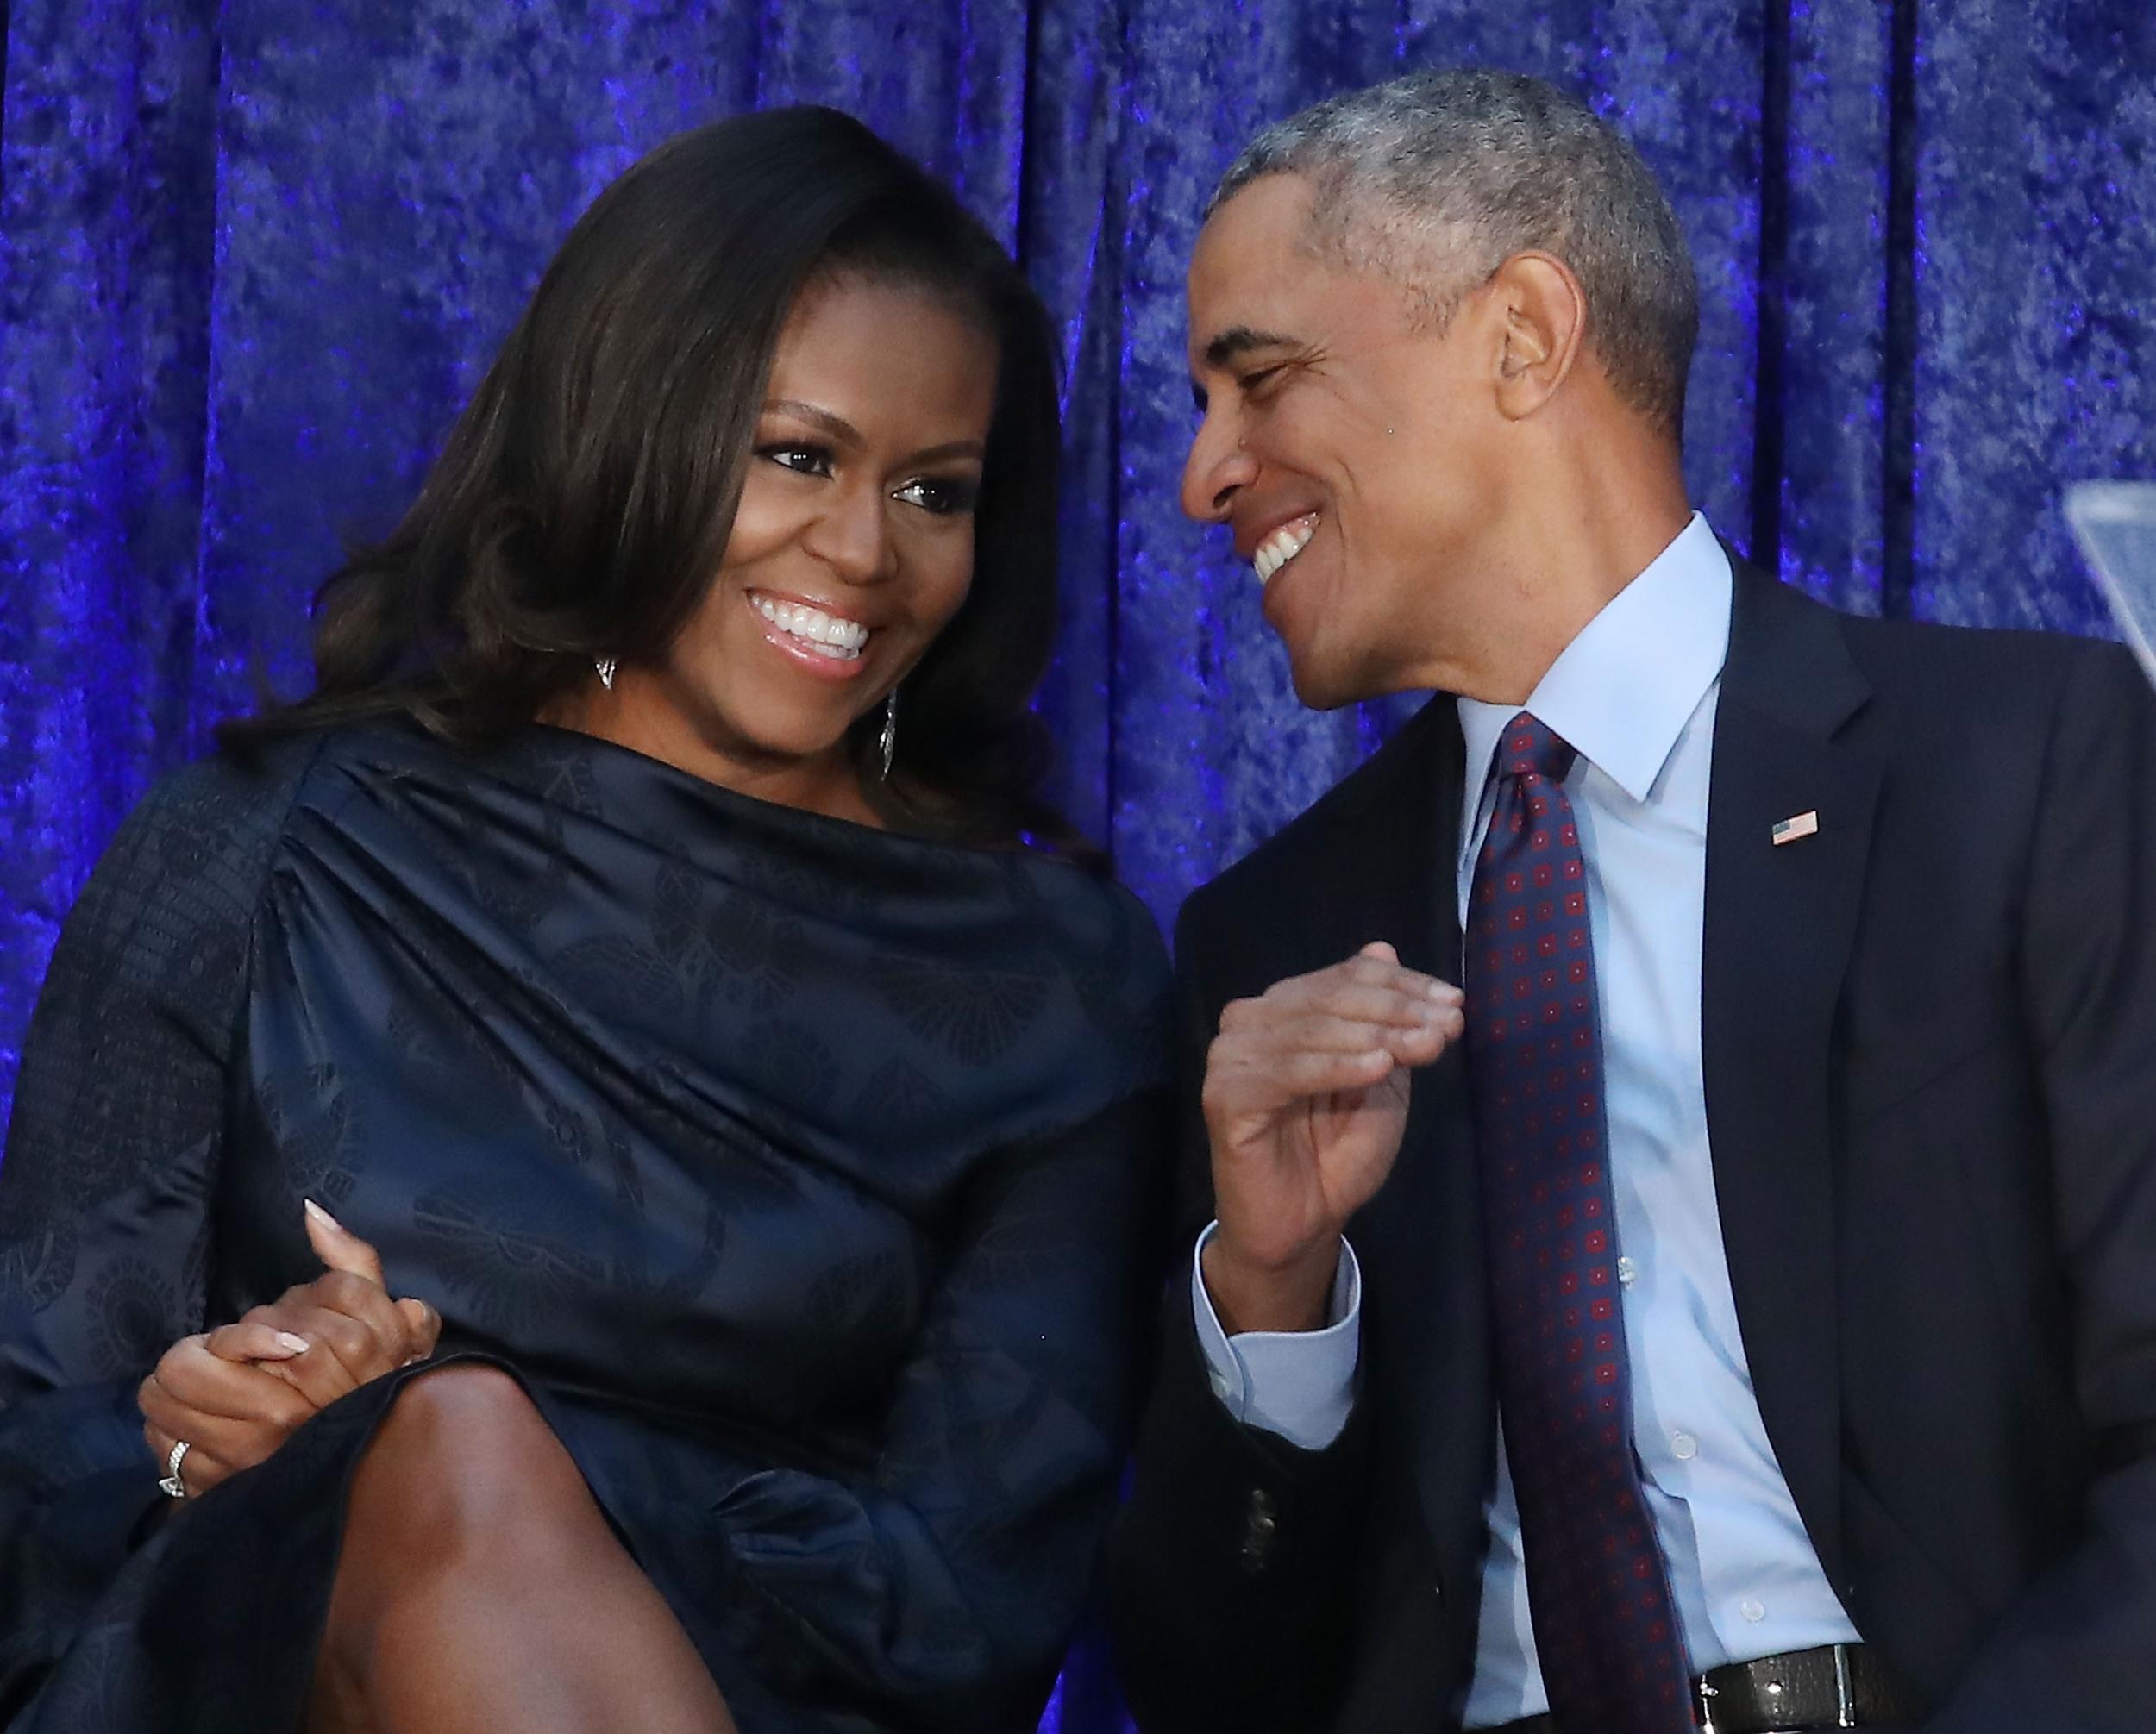 Michelle and Barack Obama marvel at their fee